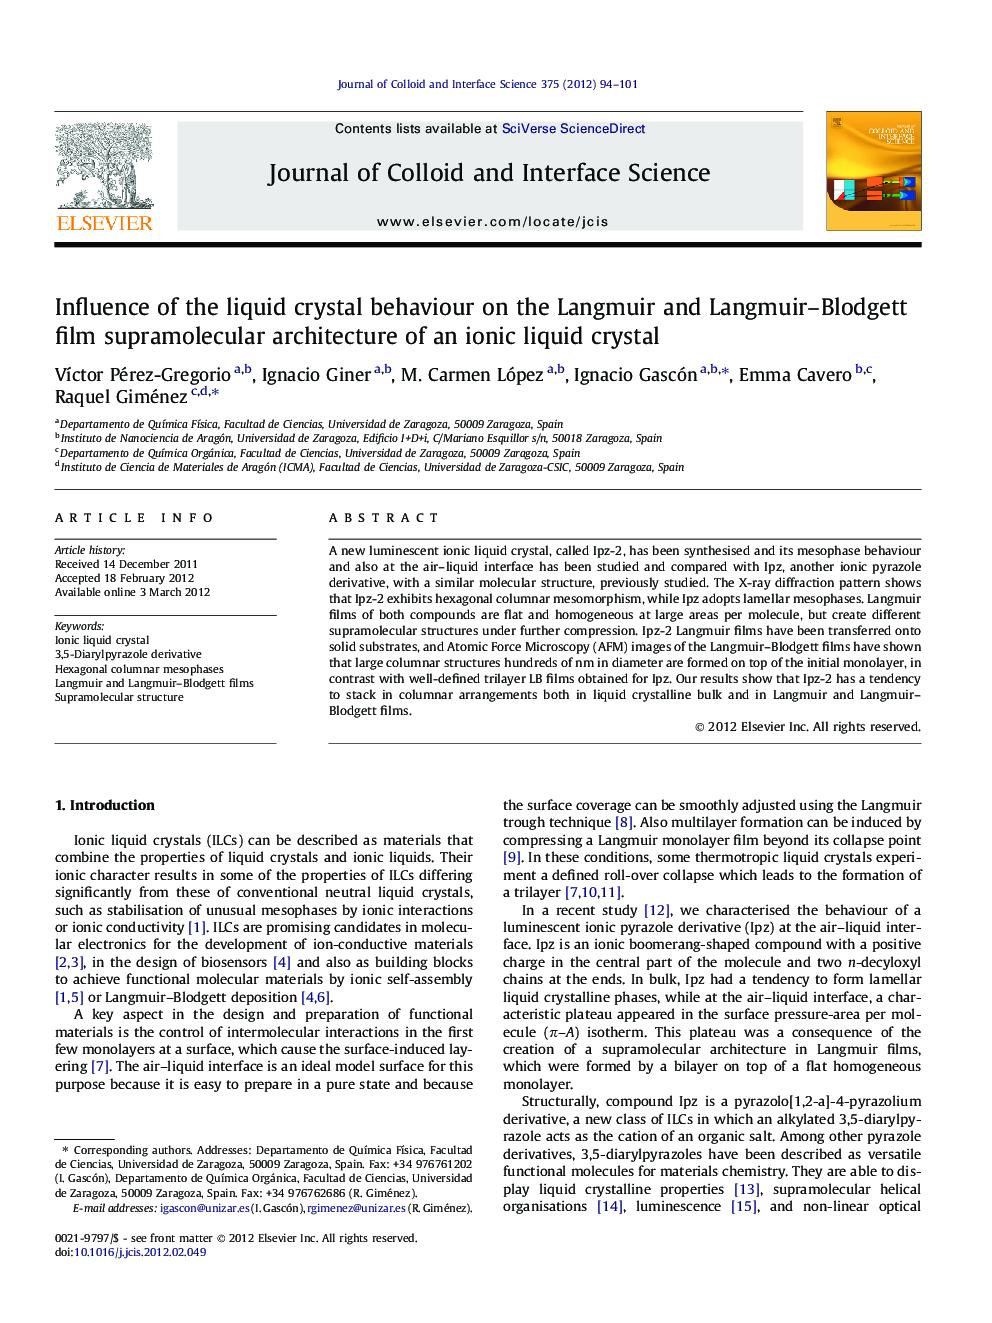 Influence of the liquid crystal behaviour on the Langmuir and Langmuir-Blodgett film supramolecular architecture of an ionic liquid crystal